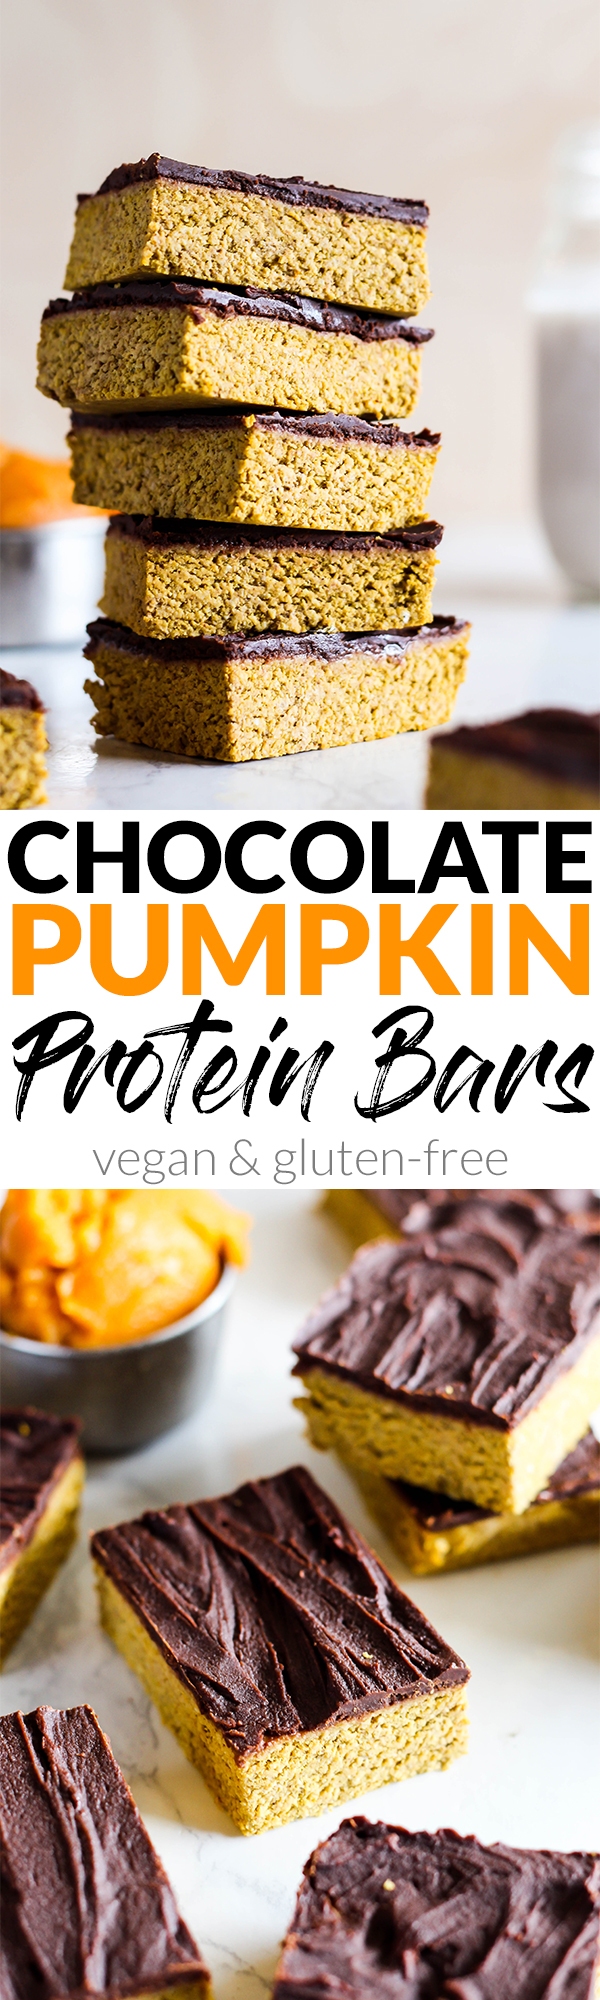 Celebrate fall with these Chocolate Pumpkin Protein Bars - perfect for a sweet snack or healthy dessert! They're vegan, gluten-free & done in under 1 hour.